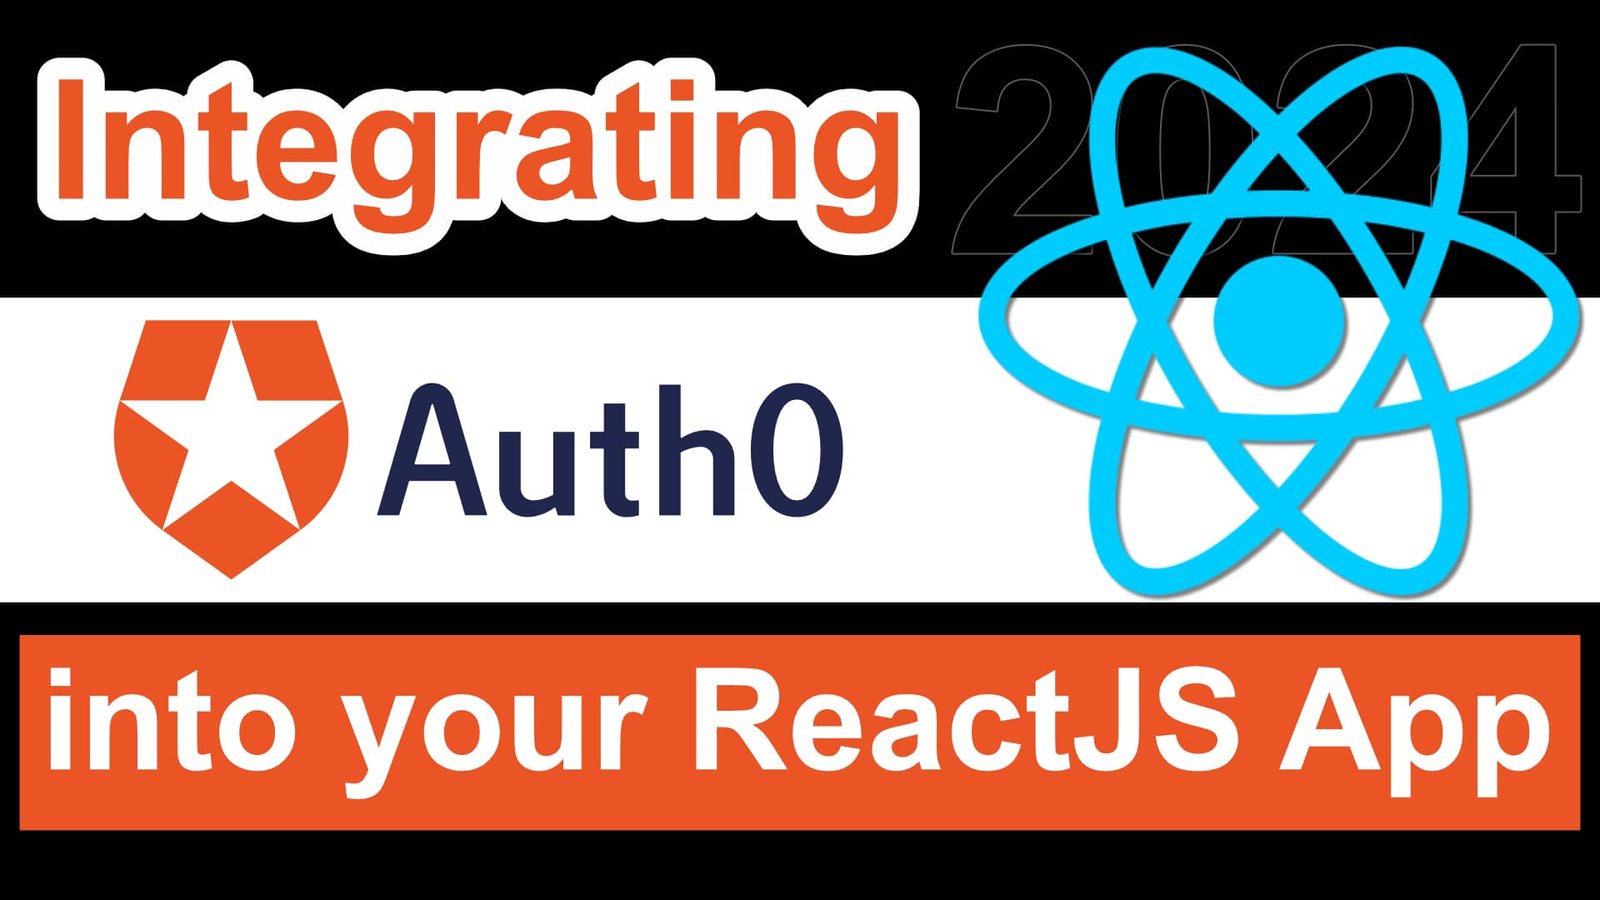 A banner showing the integration of Auth0 into a ReactJS app, with logos and text.